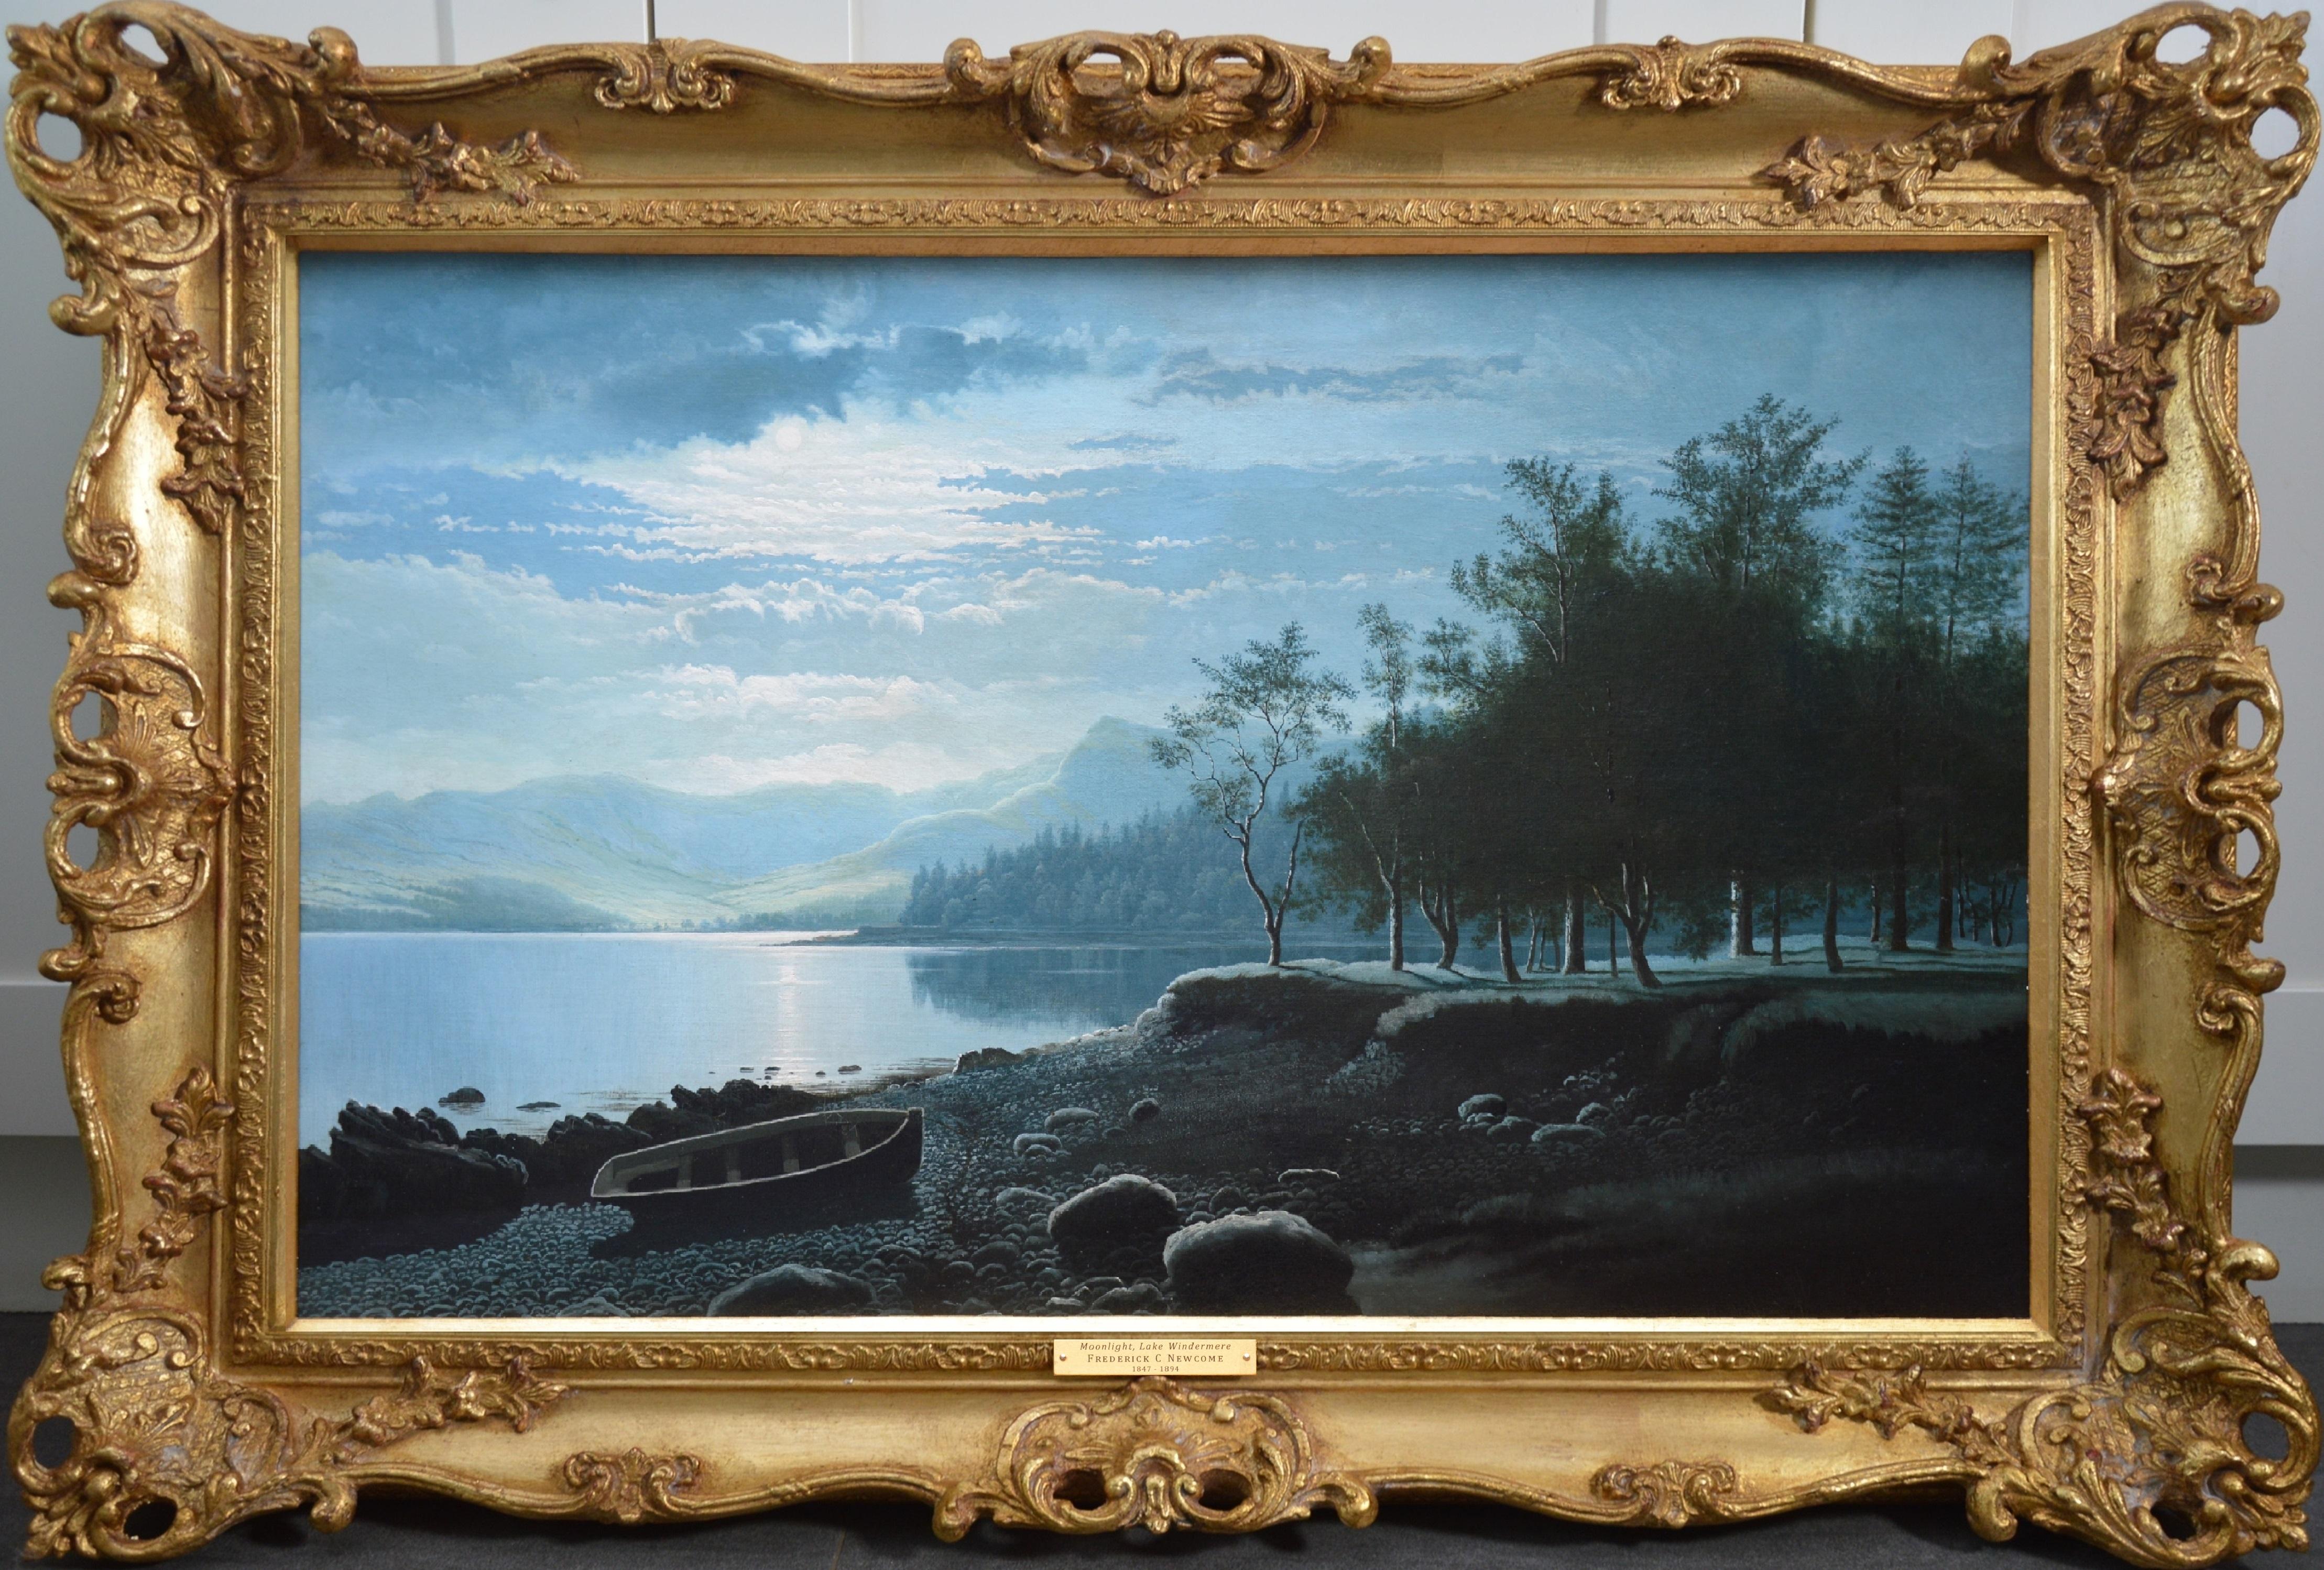 Frederick Clive Newcome  Landscape Painting - Moonlight, Lake Windermere - 19th Century Landscape Nocturne Oil Painting 